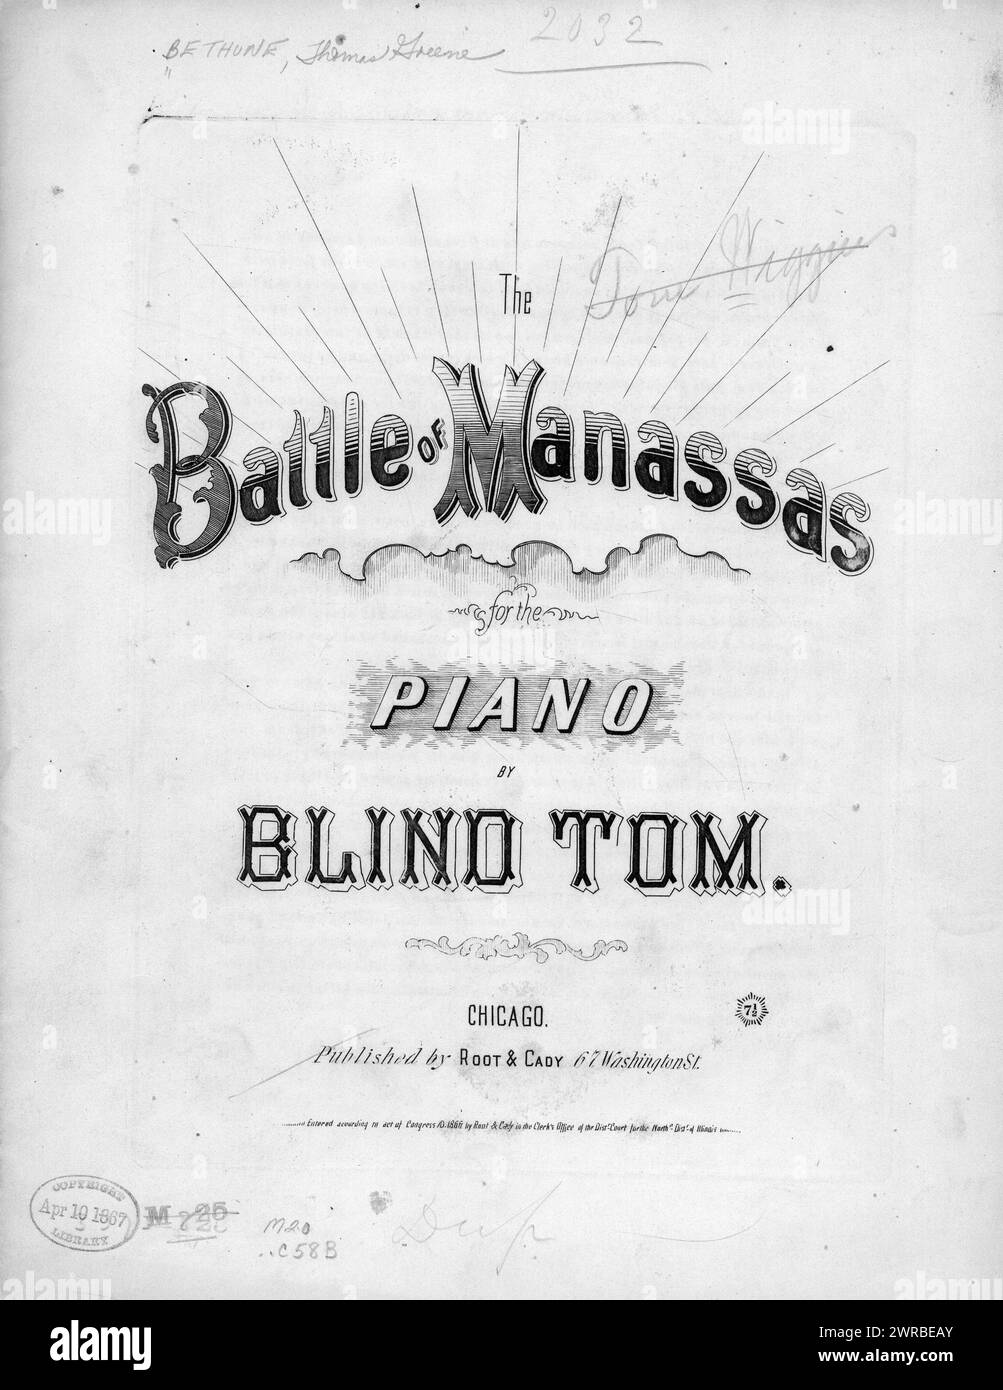 The Battle of Manassas, Blind Tom (composer), Root & Cady, Chicago, 1866., United States, History, Civil War, 1861-1865, Songs and music Stock Photo